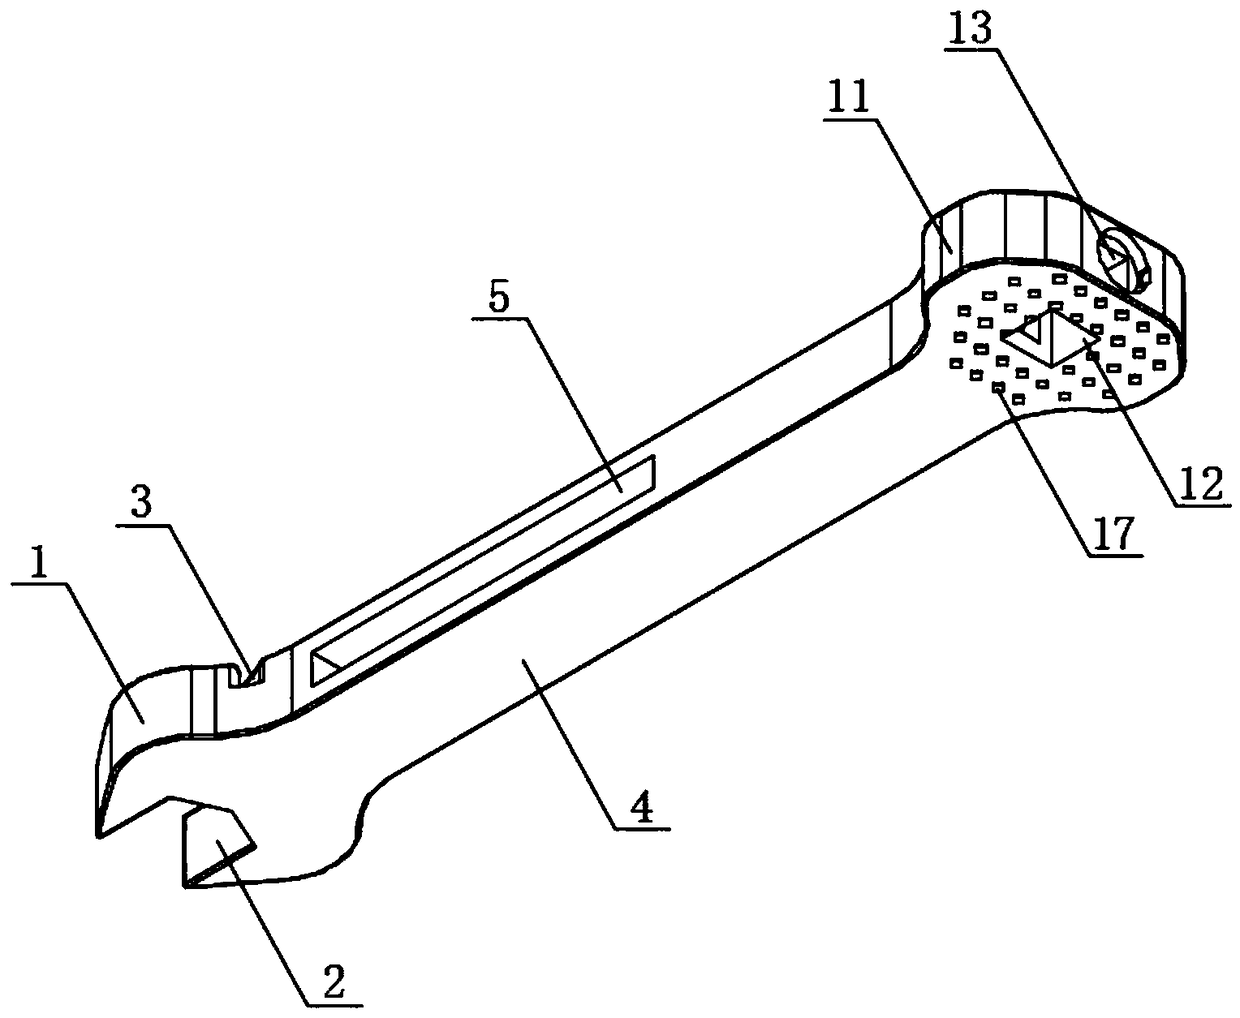 Double-head wrench capable of measuring locking clearance and being used for chiseling